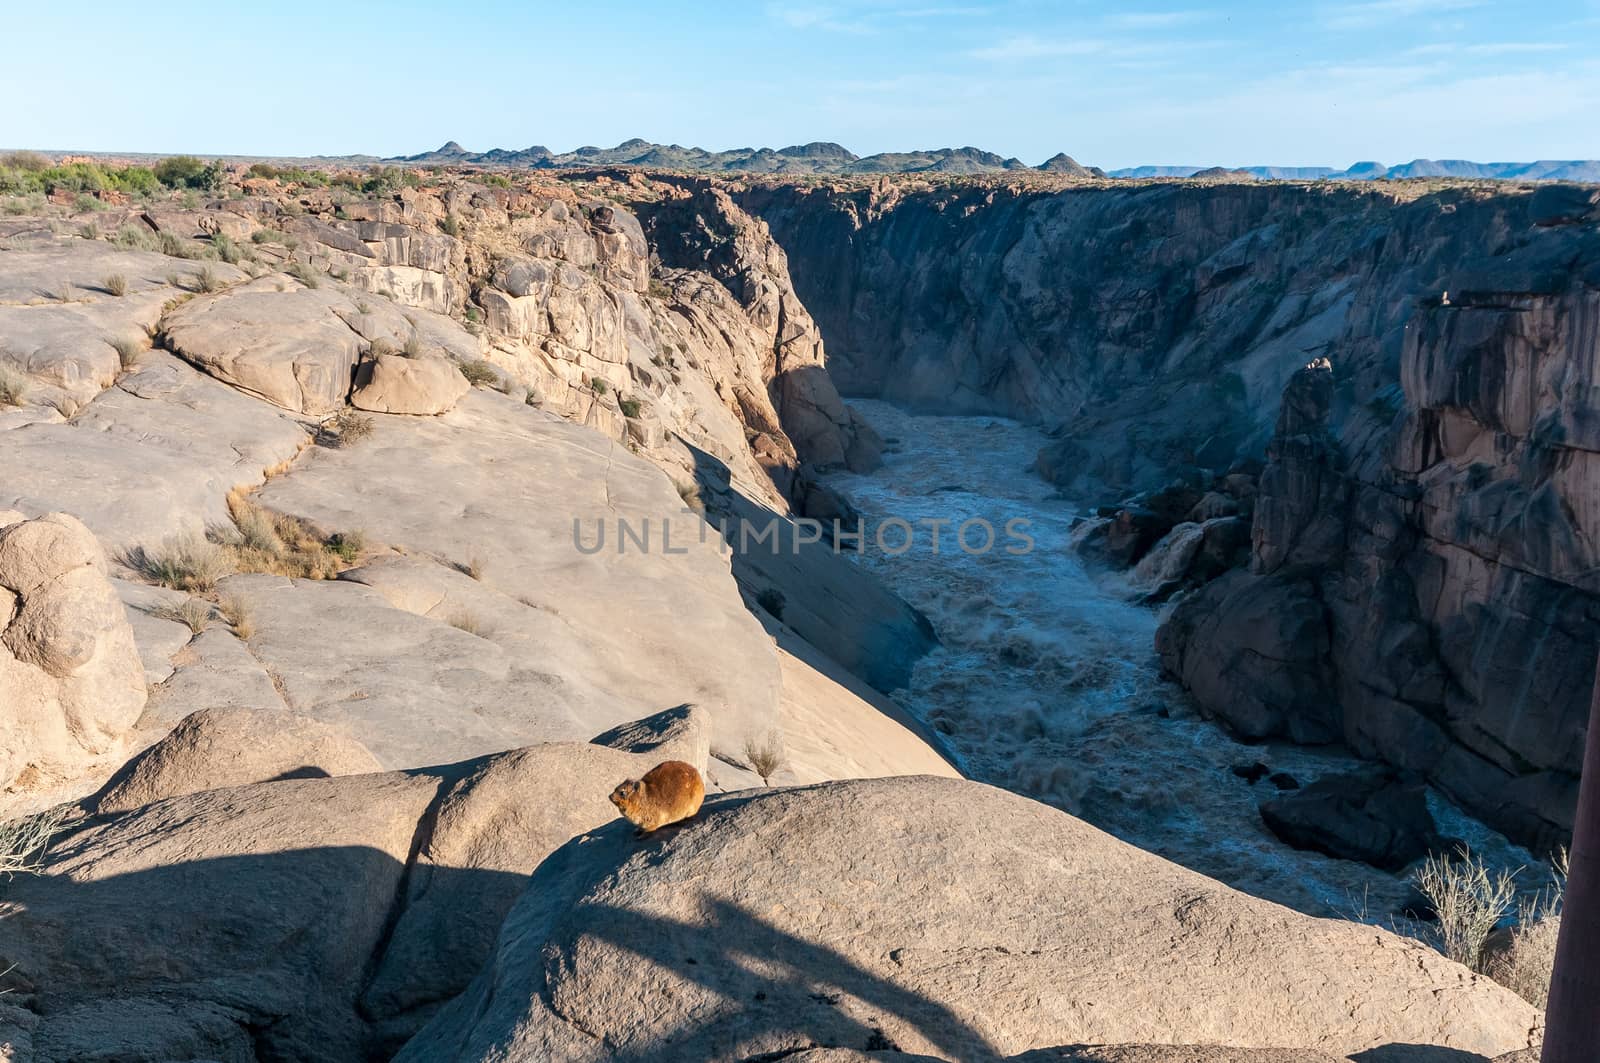 A hyrax, Procavia capensis, on a rock at the Augrabies Waterfalls. The Orange River is visible